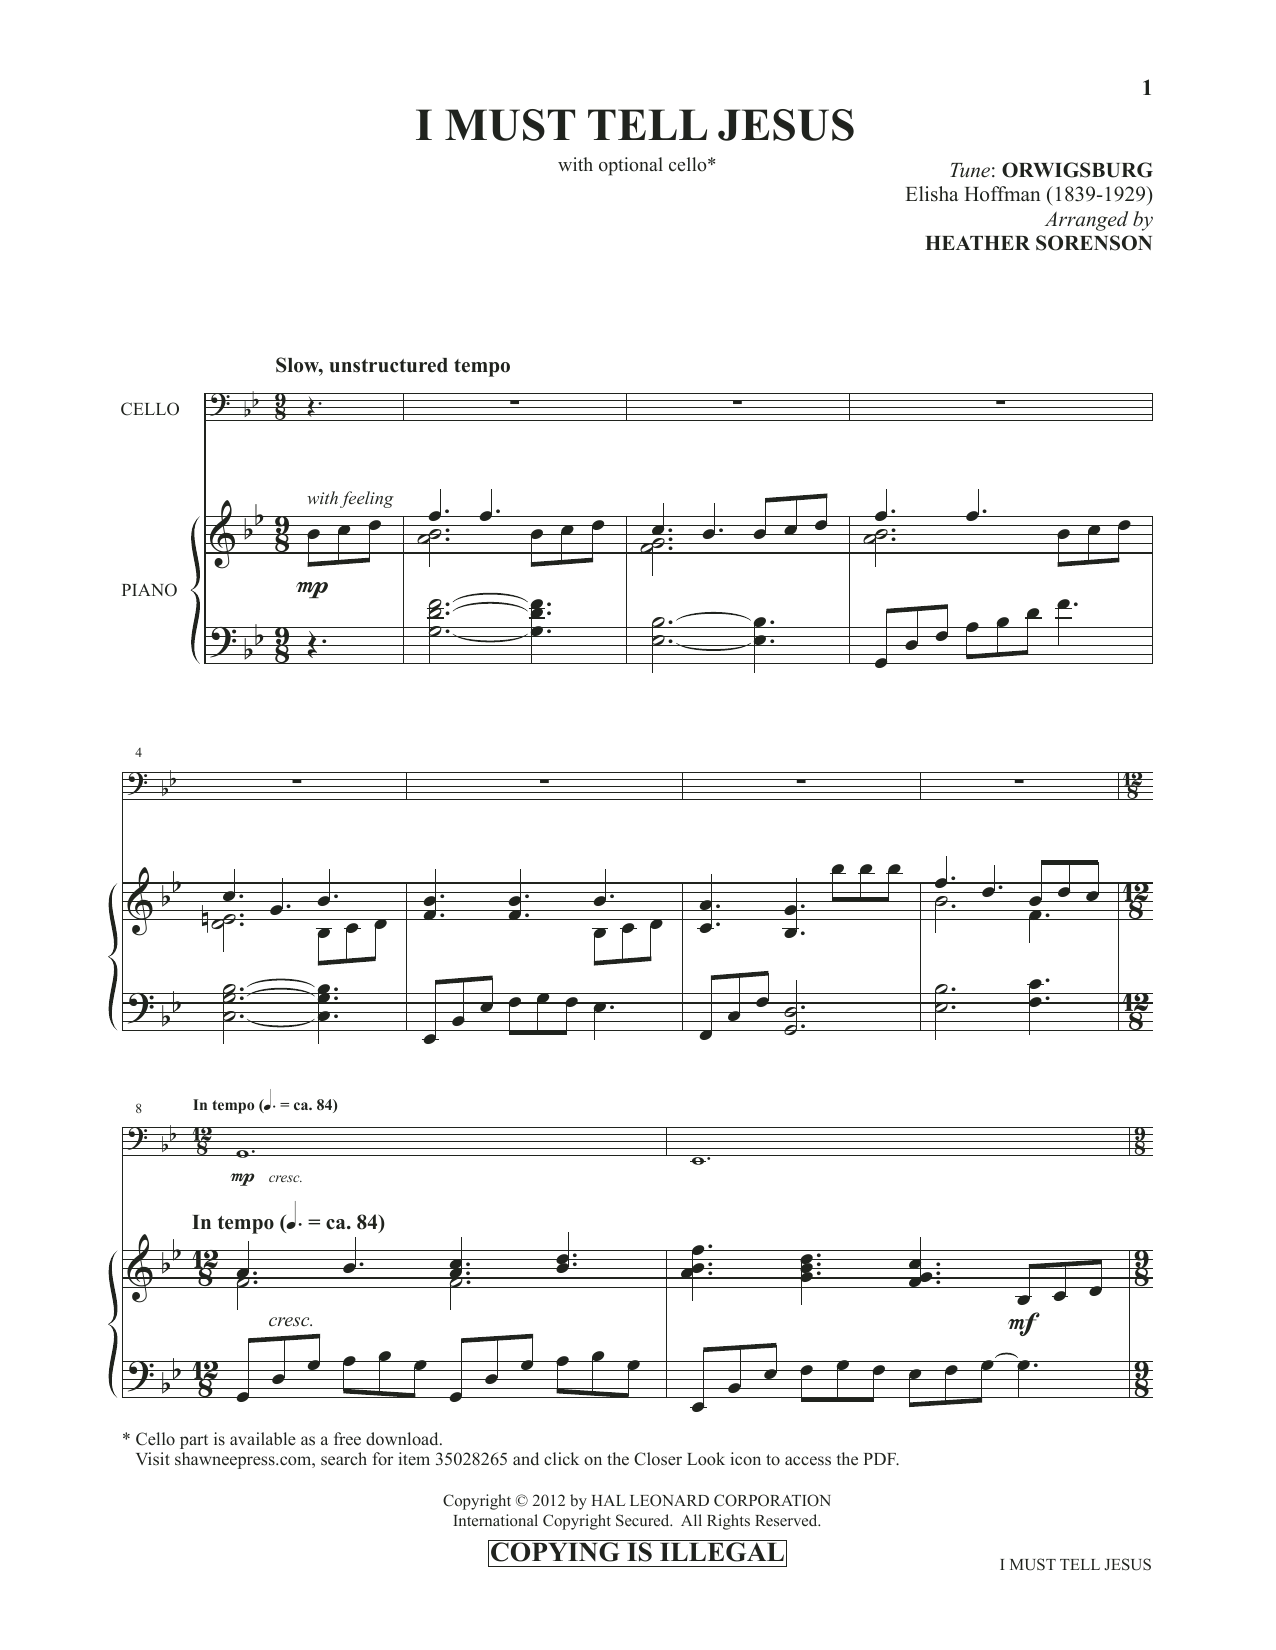 Download Heather Sorenson I Must Tell Jesus (from Images: Sacred Sheet Music